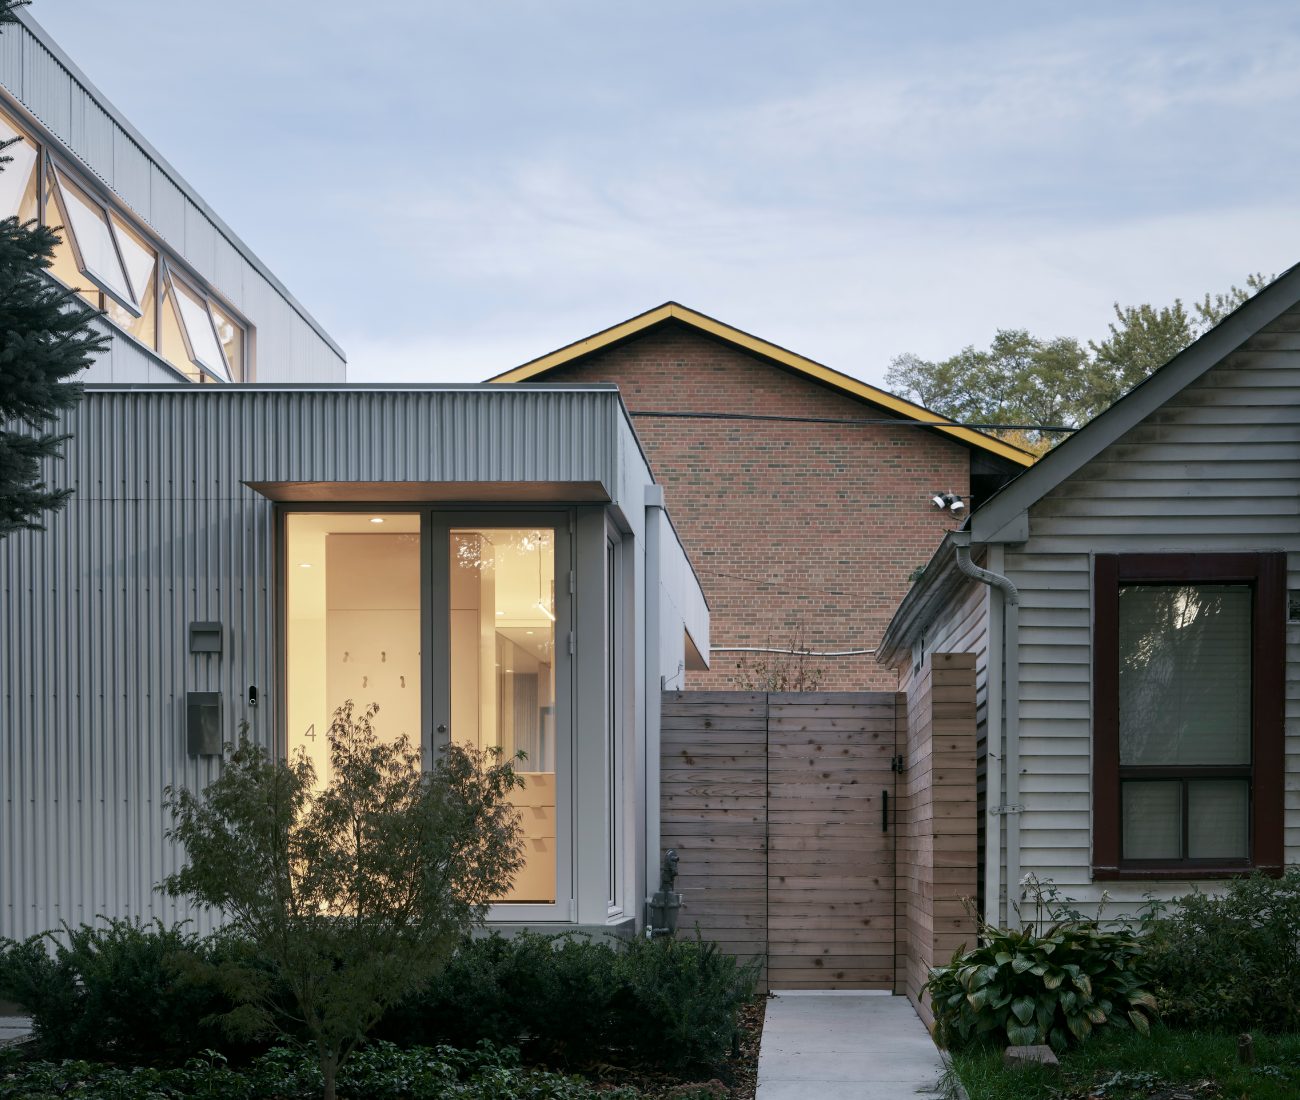 East End bungalow - architect Anya Moryoussef